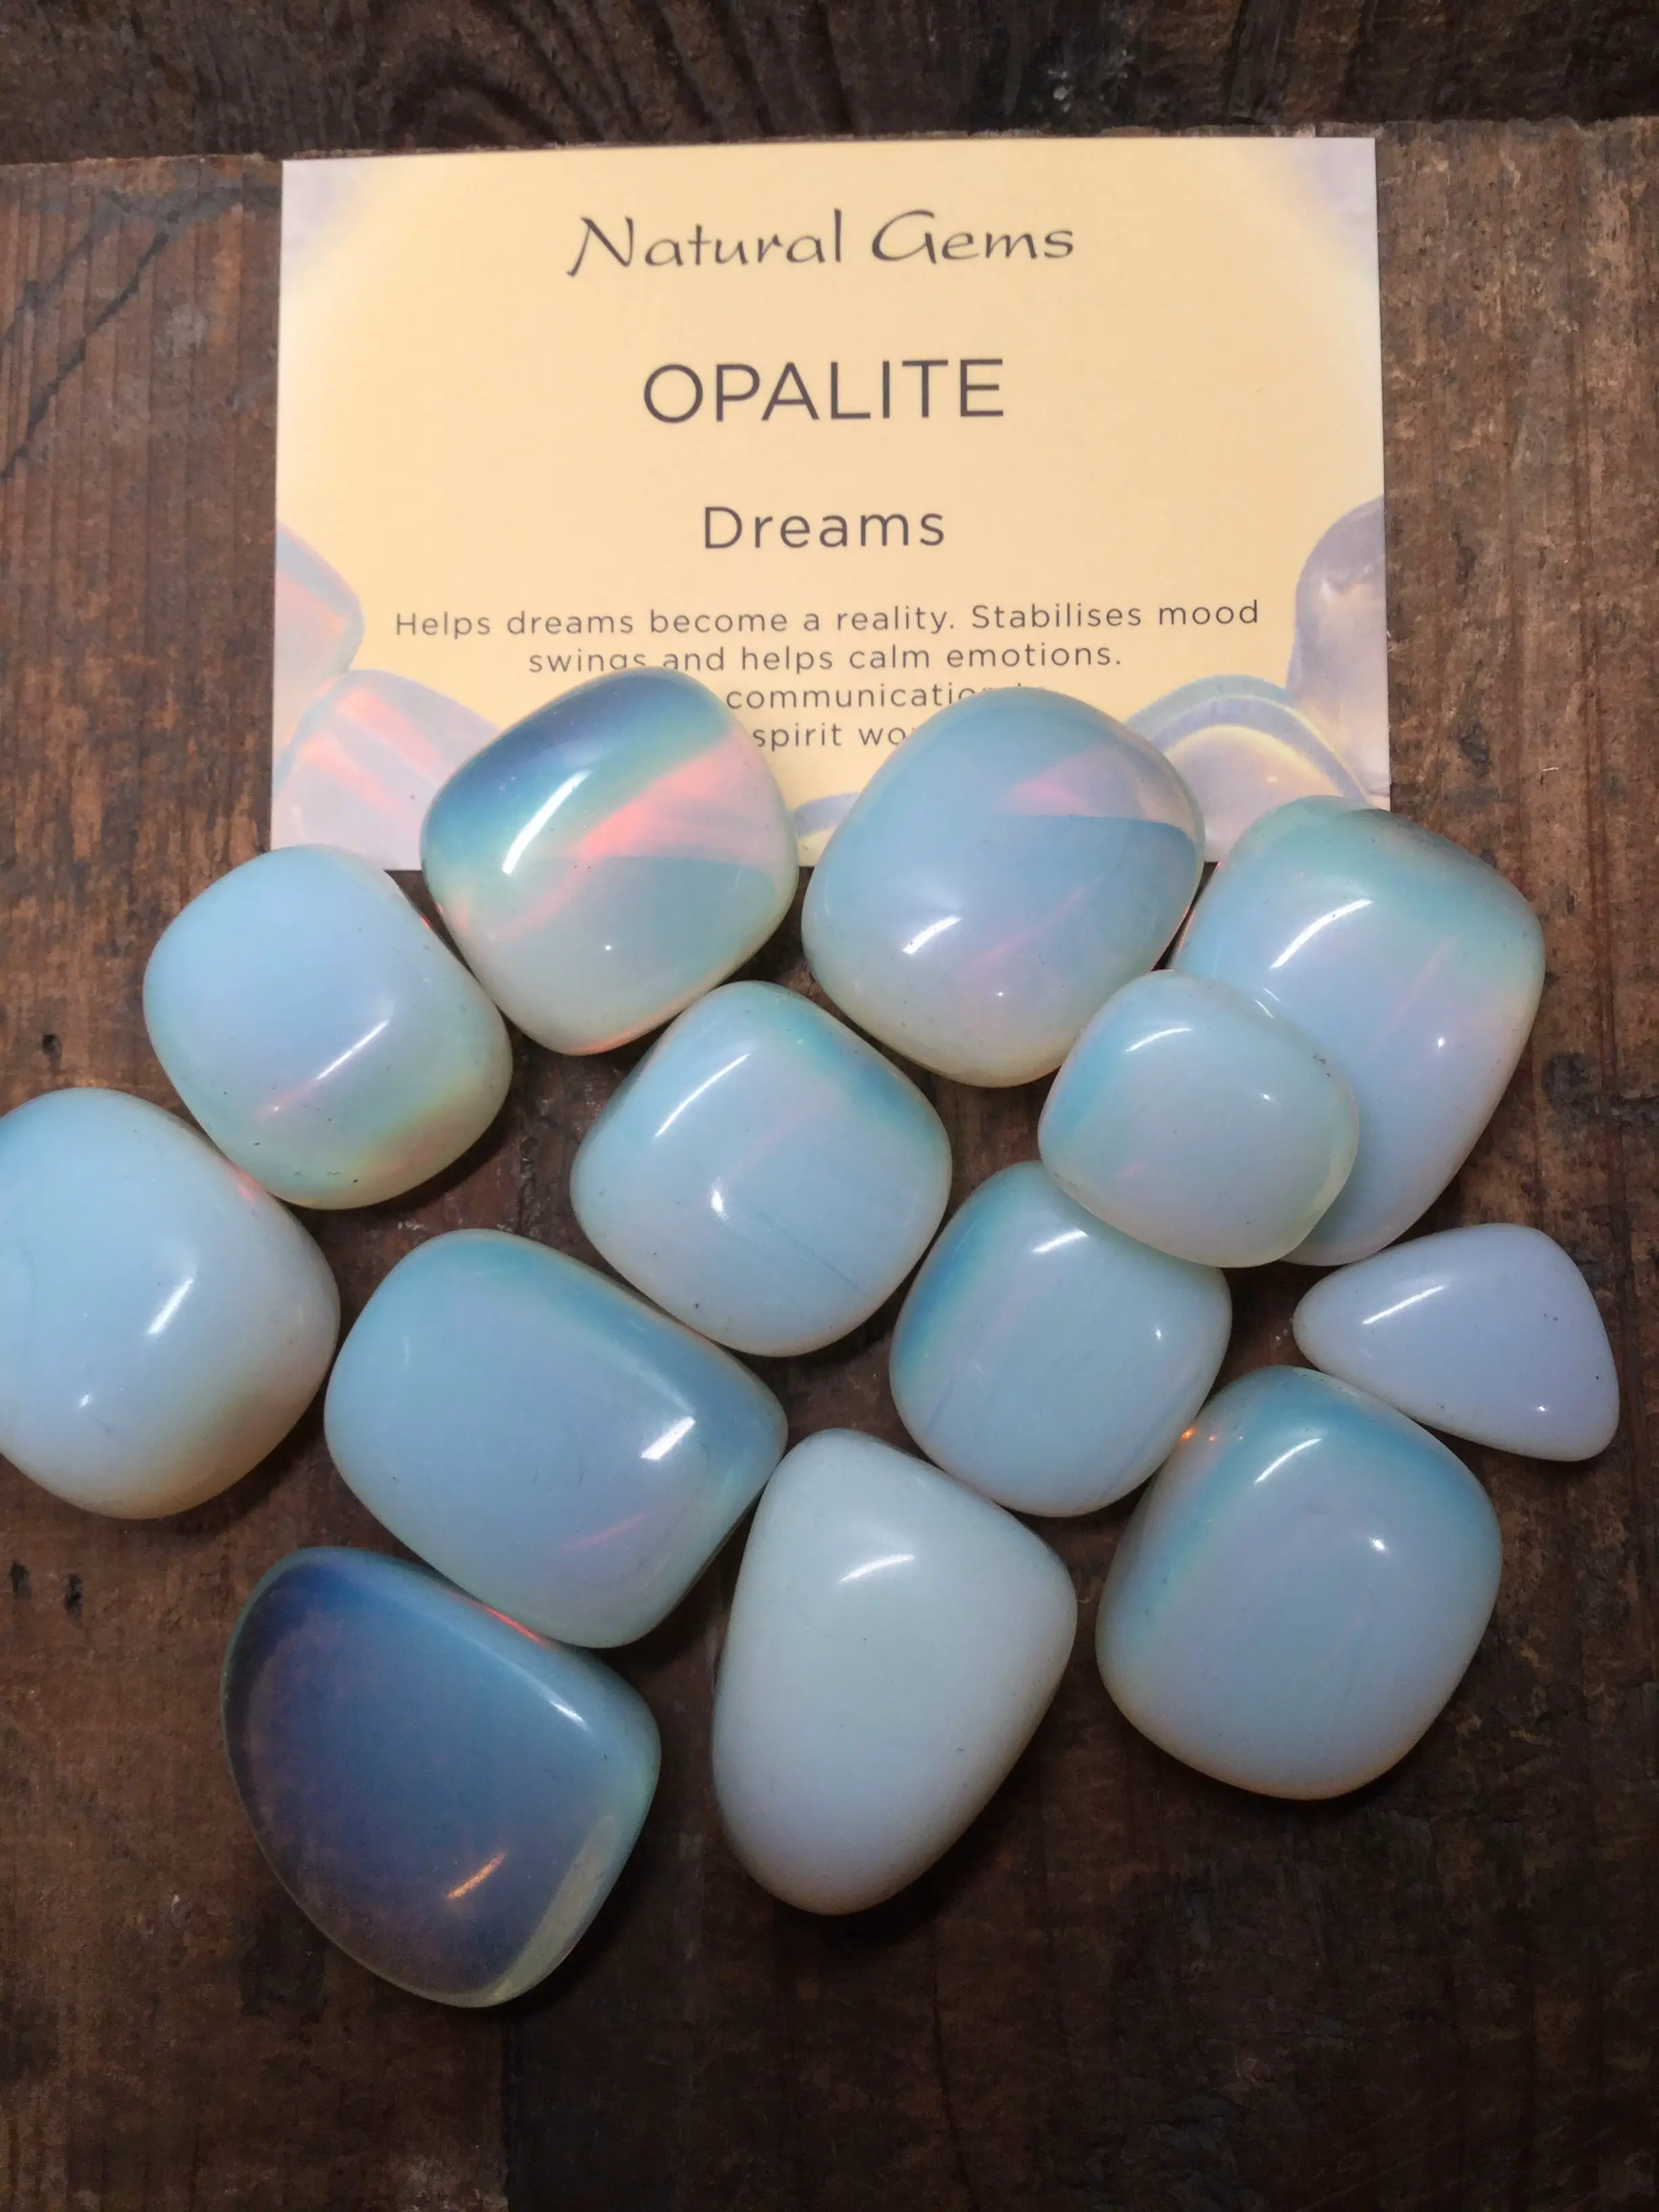 What Does Dreams With Opalite Represent?